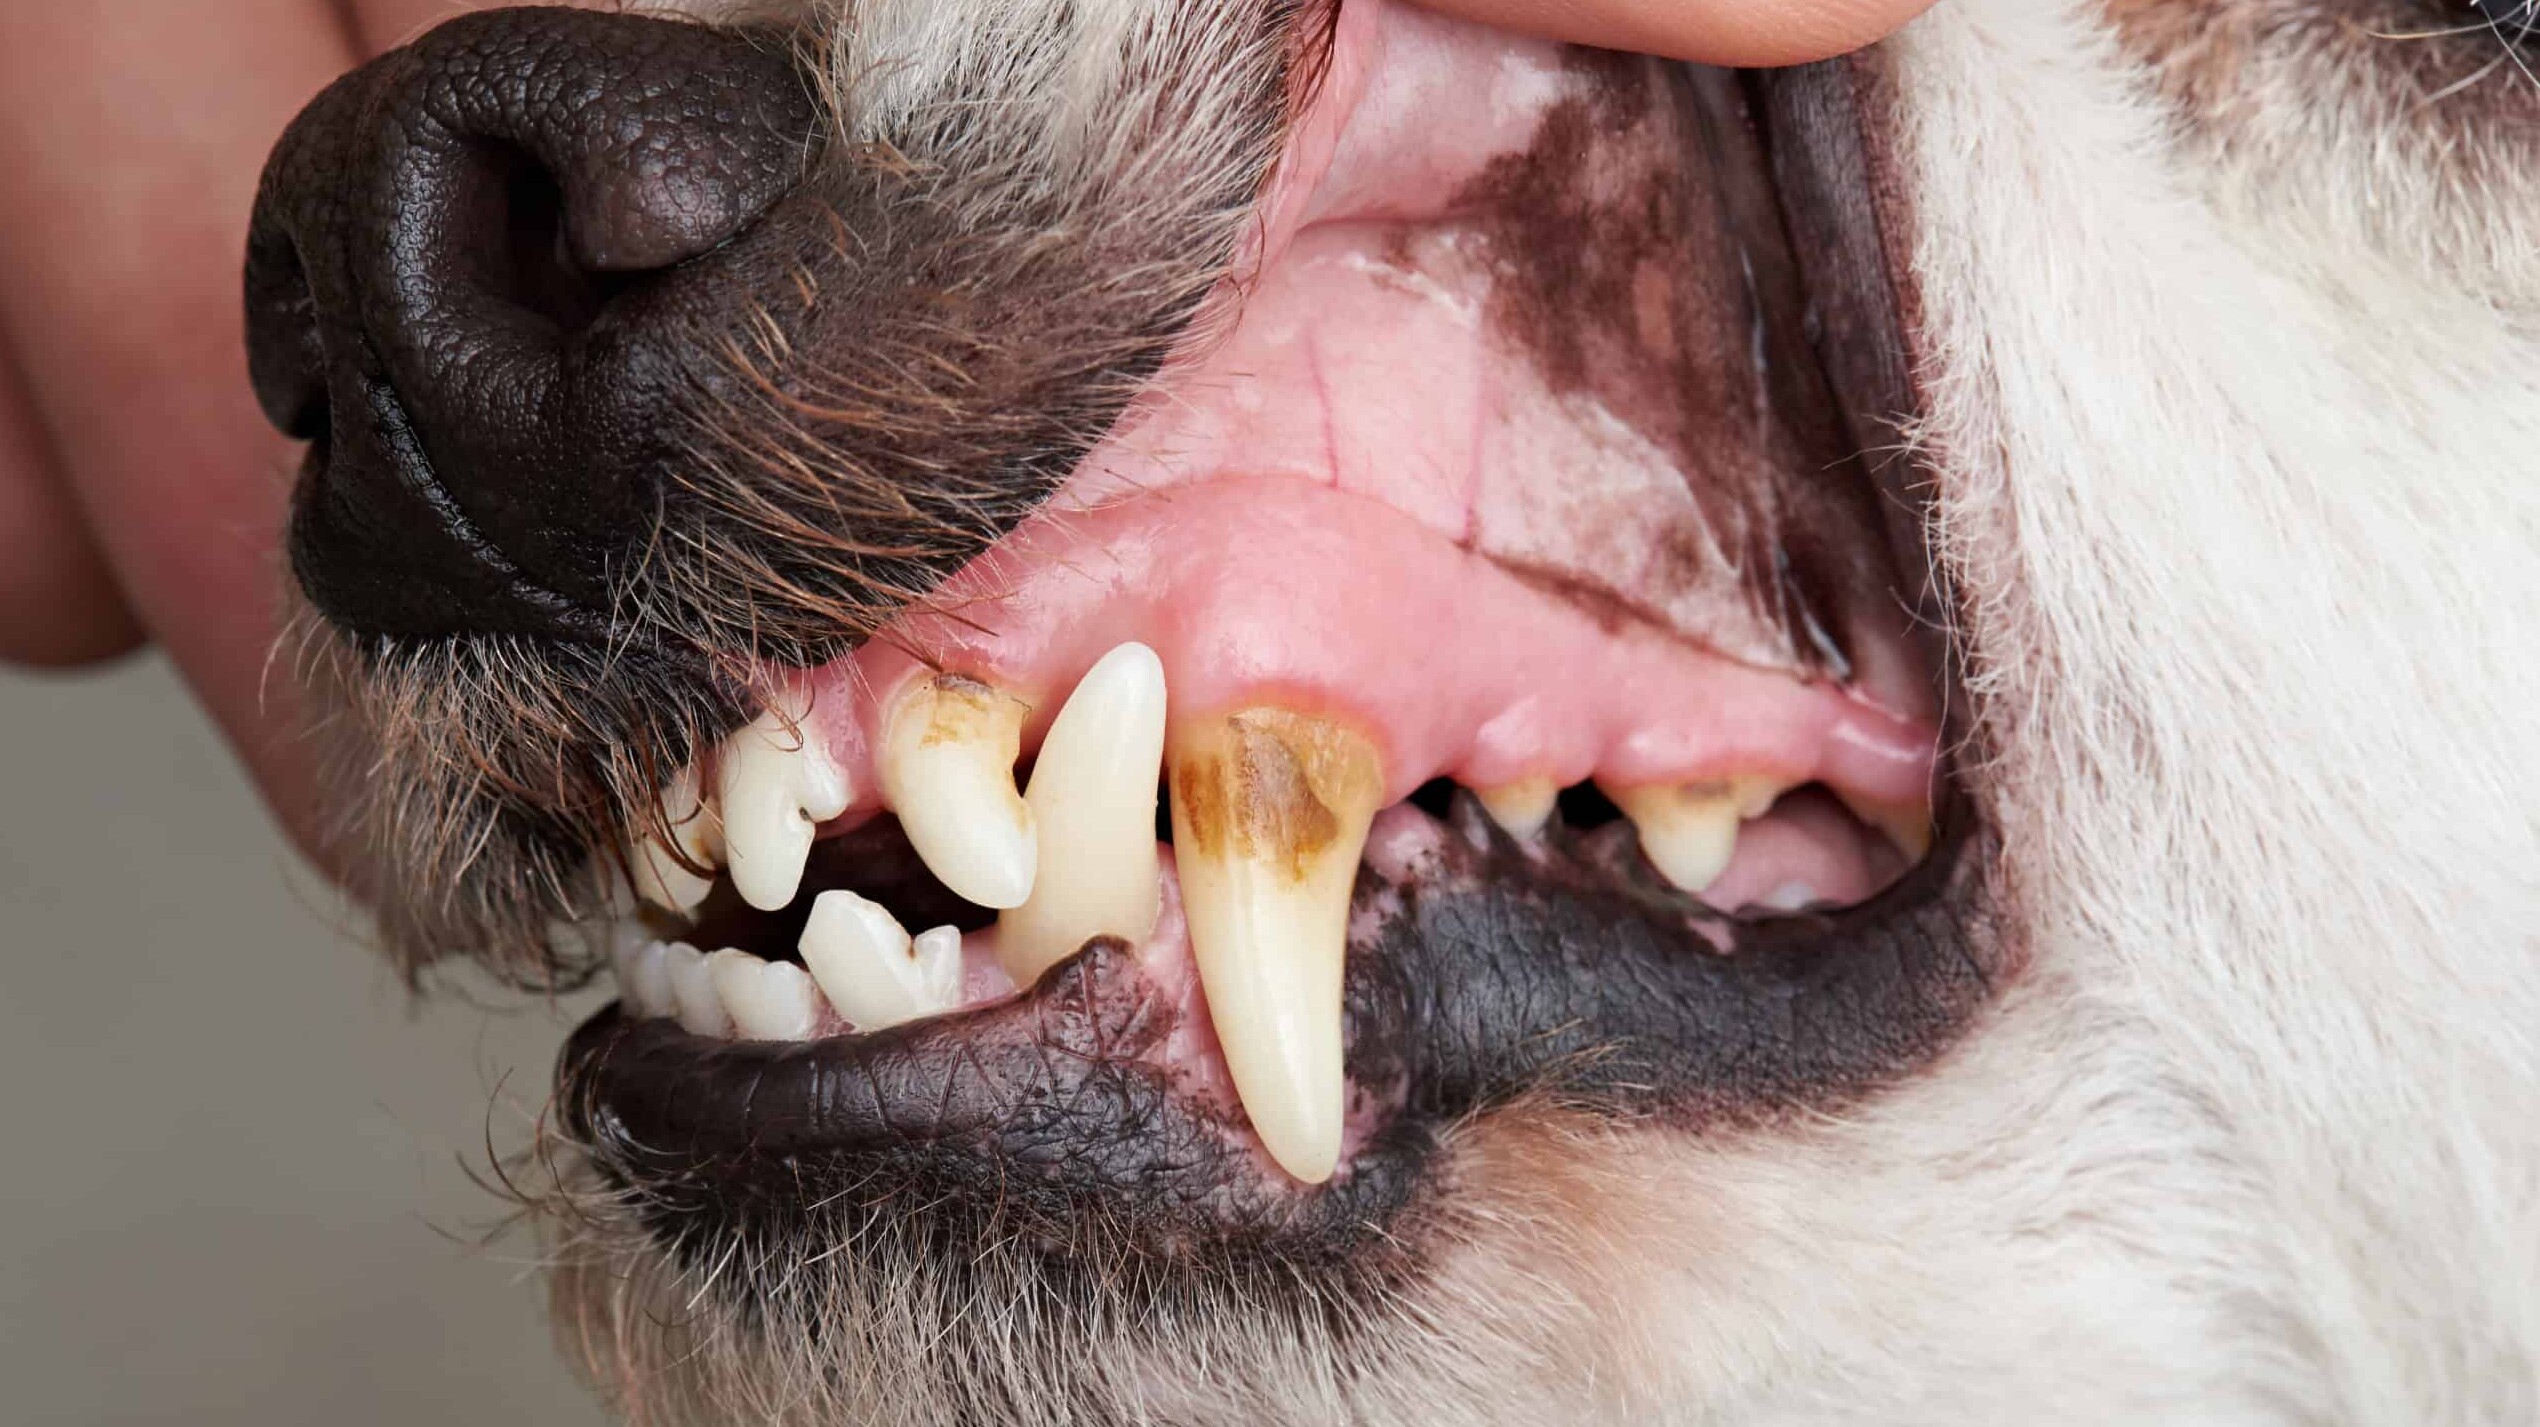 Dog's mouths need regular care